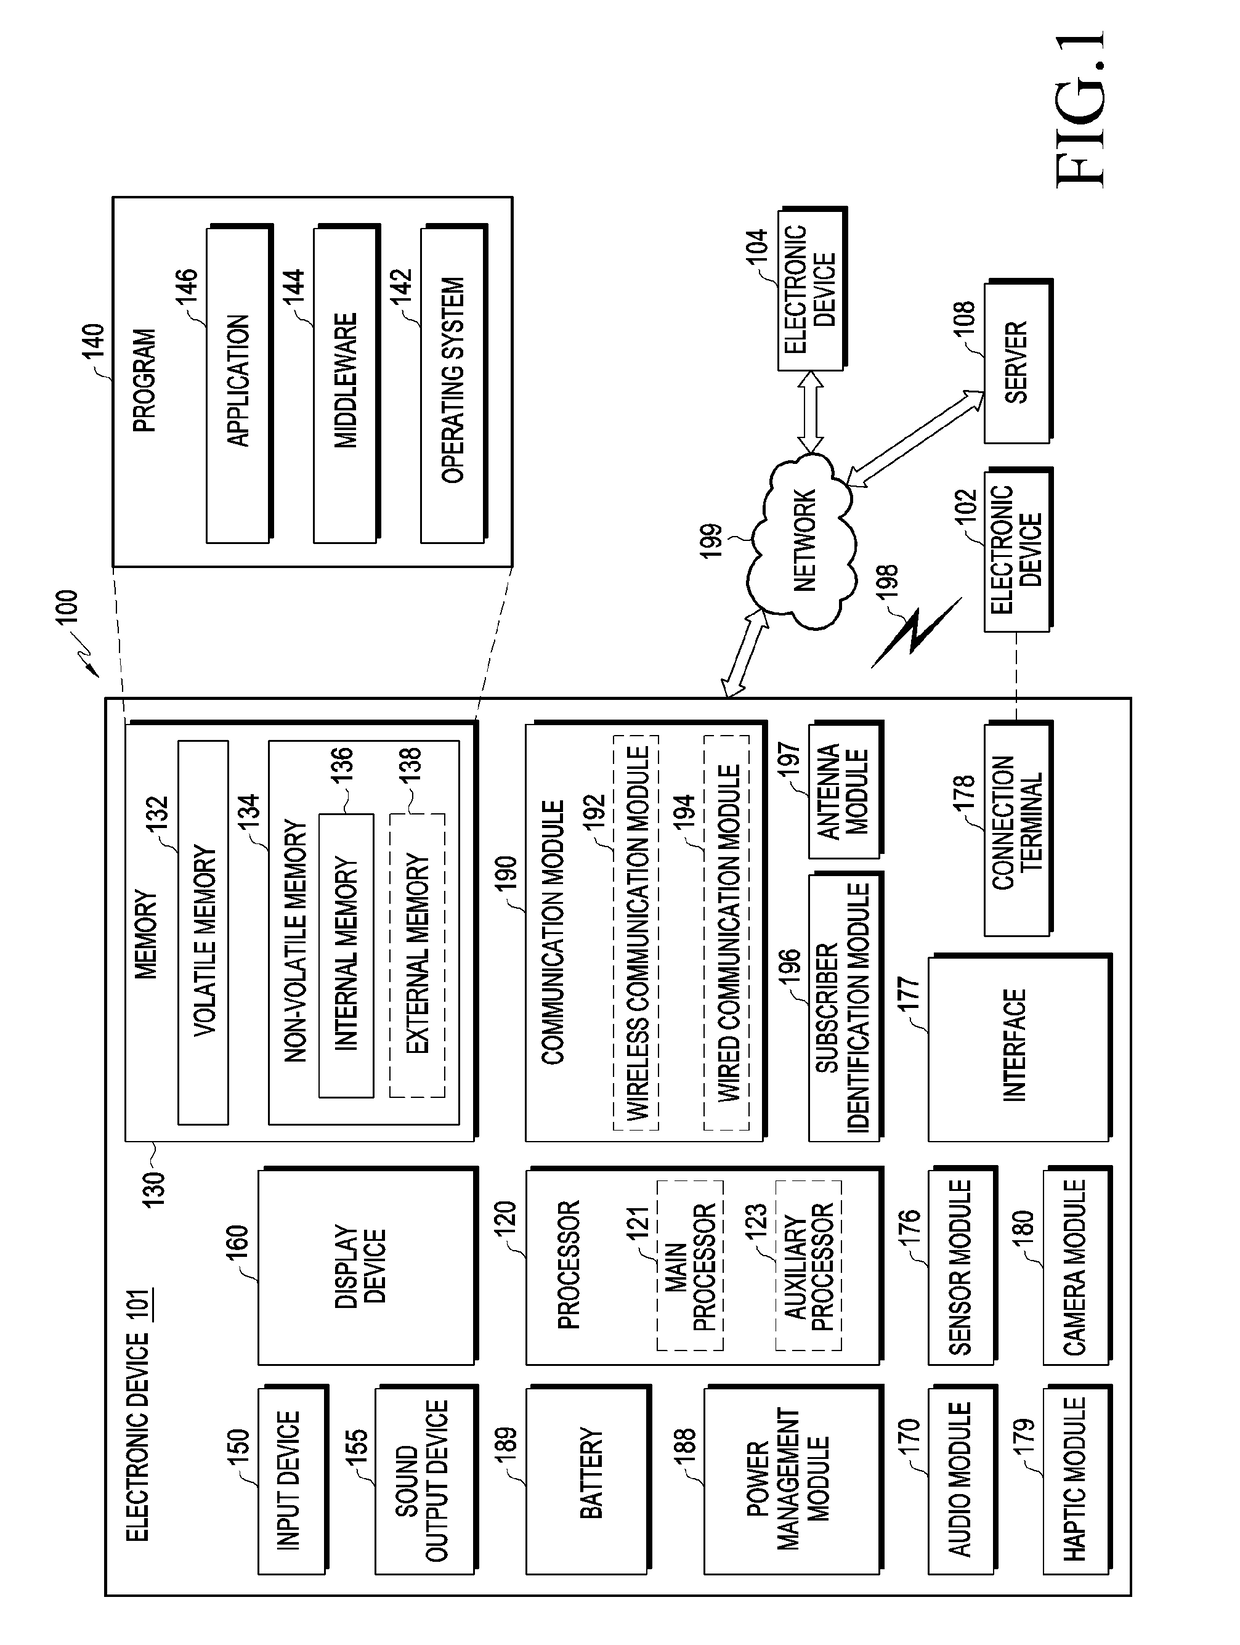 Electronic device for controlling communication circuit based on identification information received from external device and operation method thereof